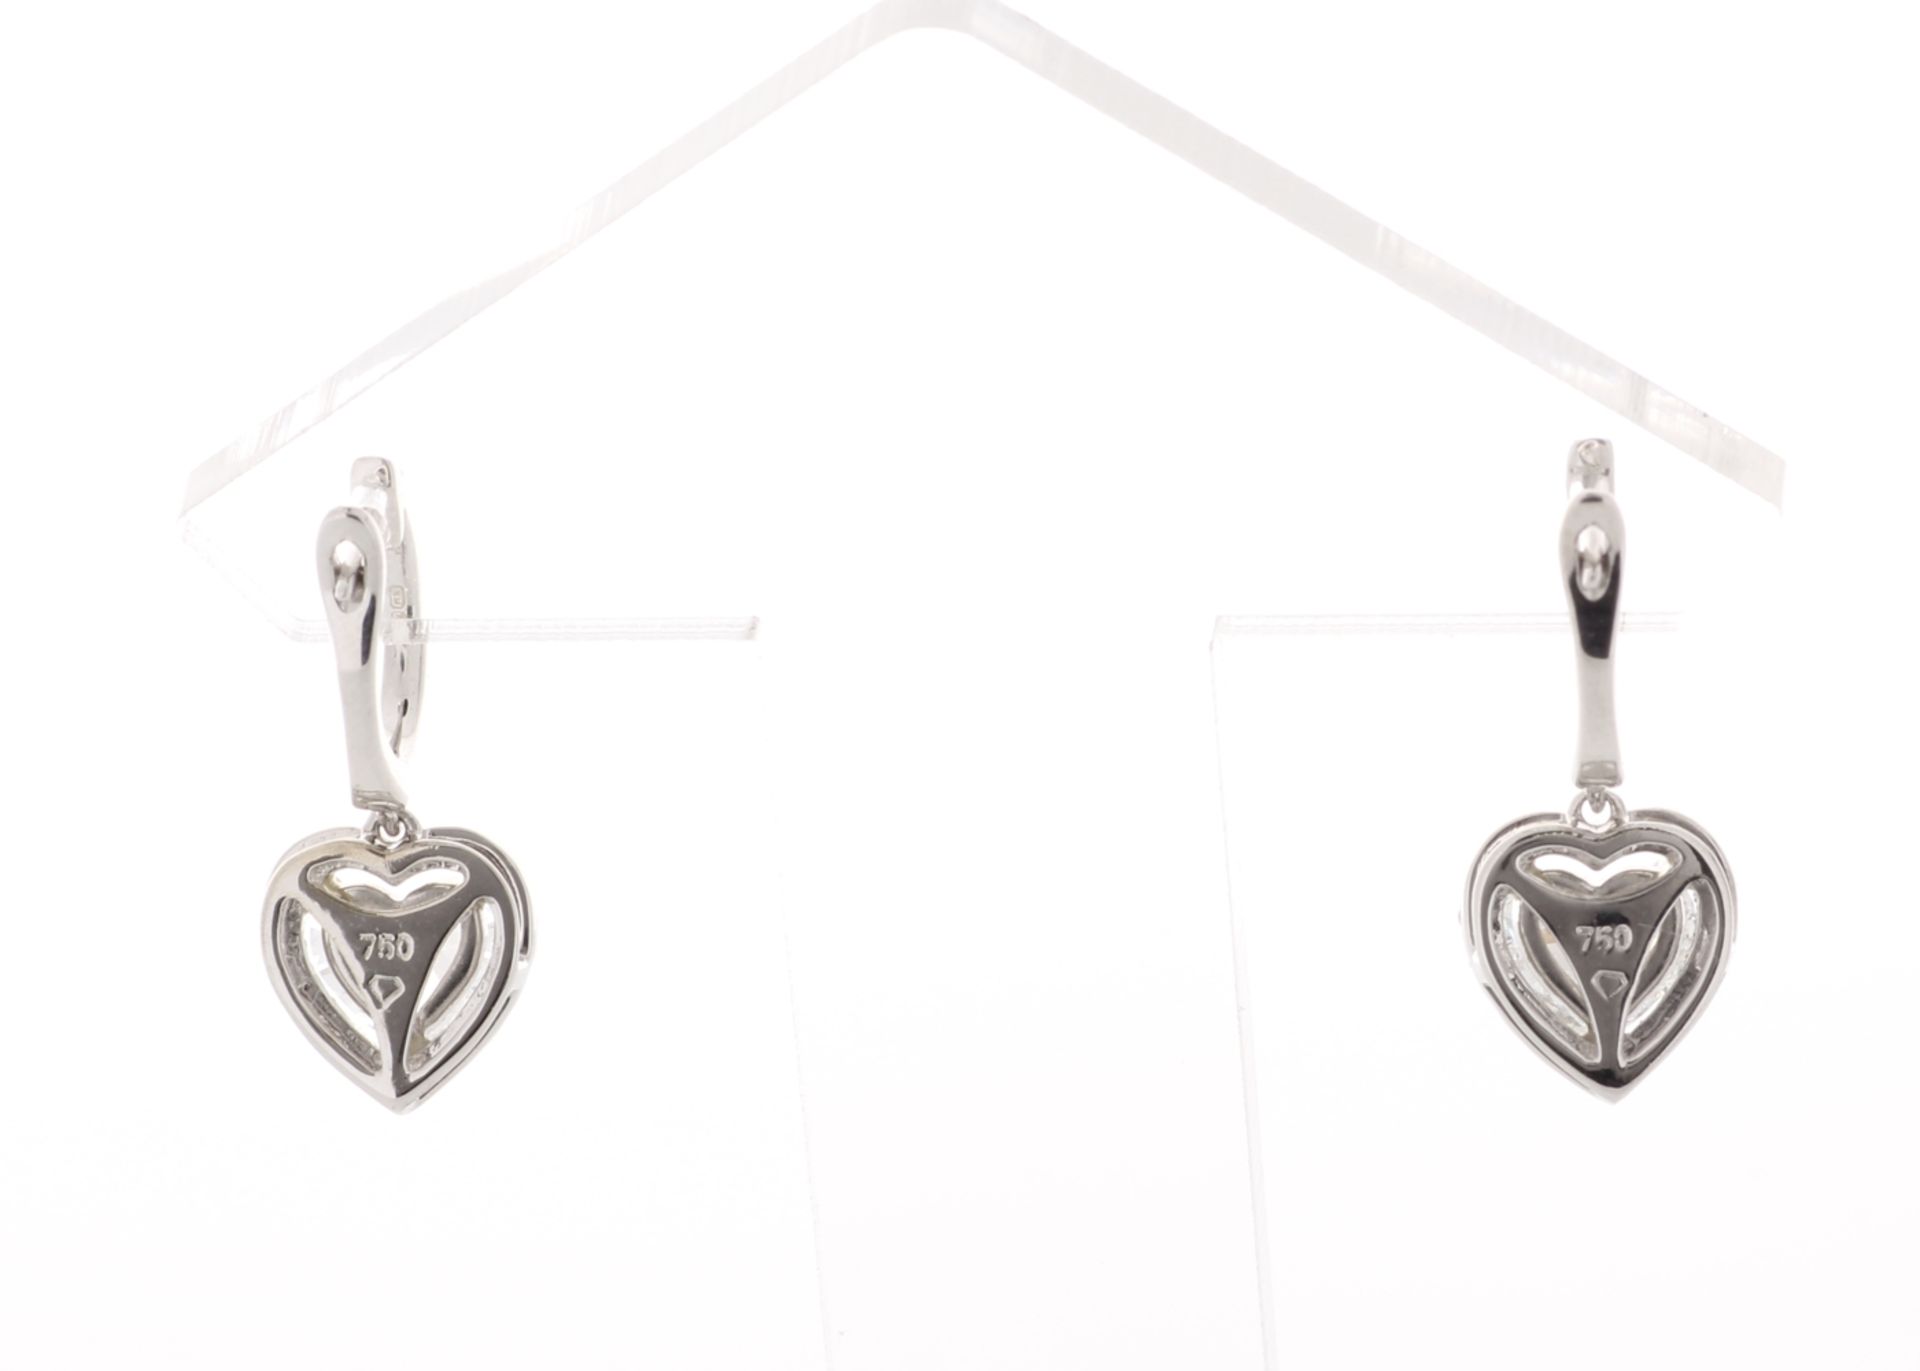 18ct White Gold Heart Shape Halo Drop Earring (1.34) 1.74 Carats - Image 4 of 4